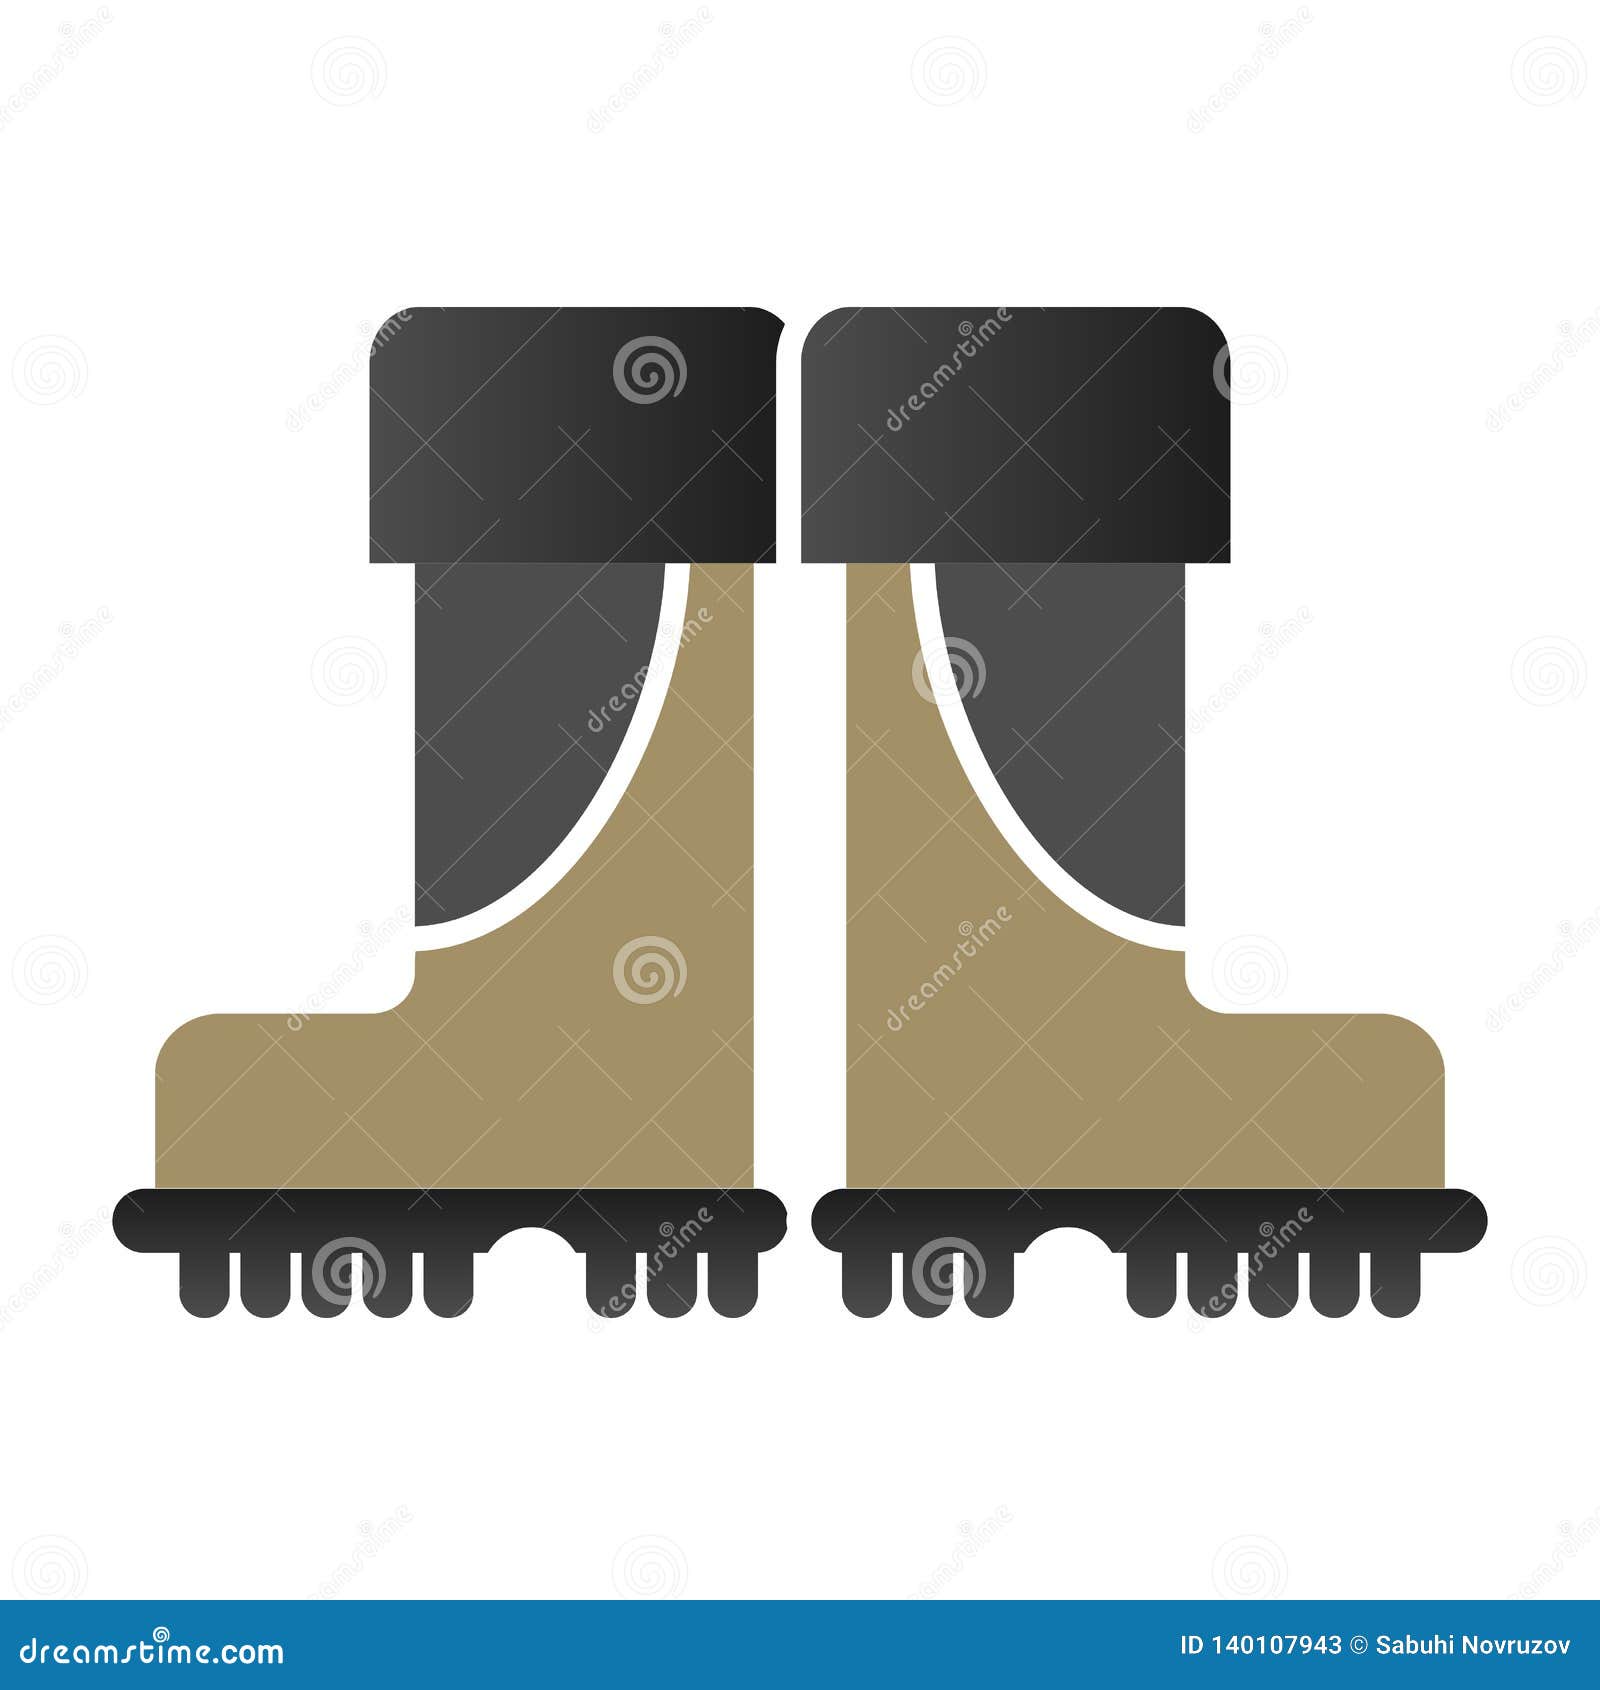 Fishing Boots Flat Icon. Rubber Boots Color Icons in Trendy Flat Style ...